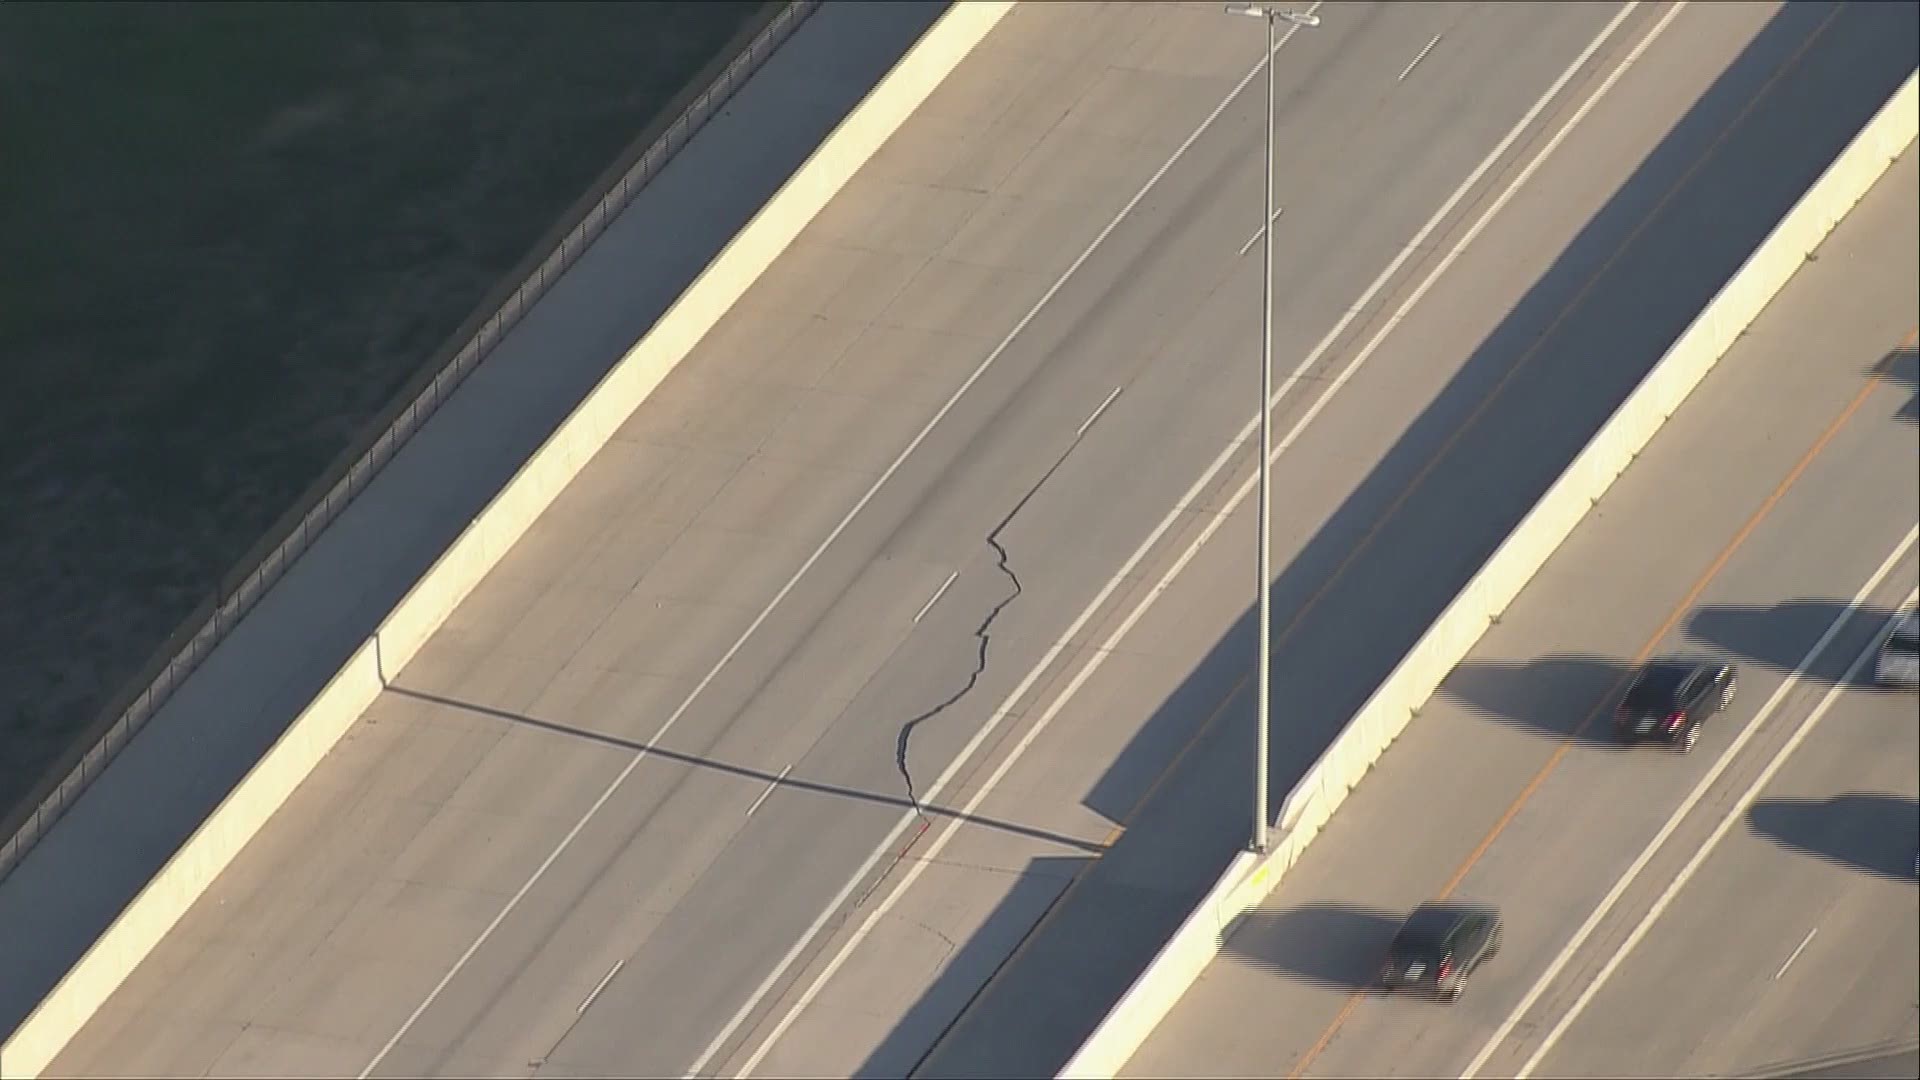 The eastbound lanes of US 36 will remain closed throughout the weekend due to a large crack that formed across the lanes of traffic.